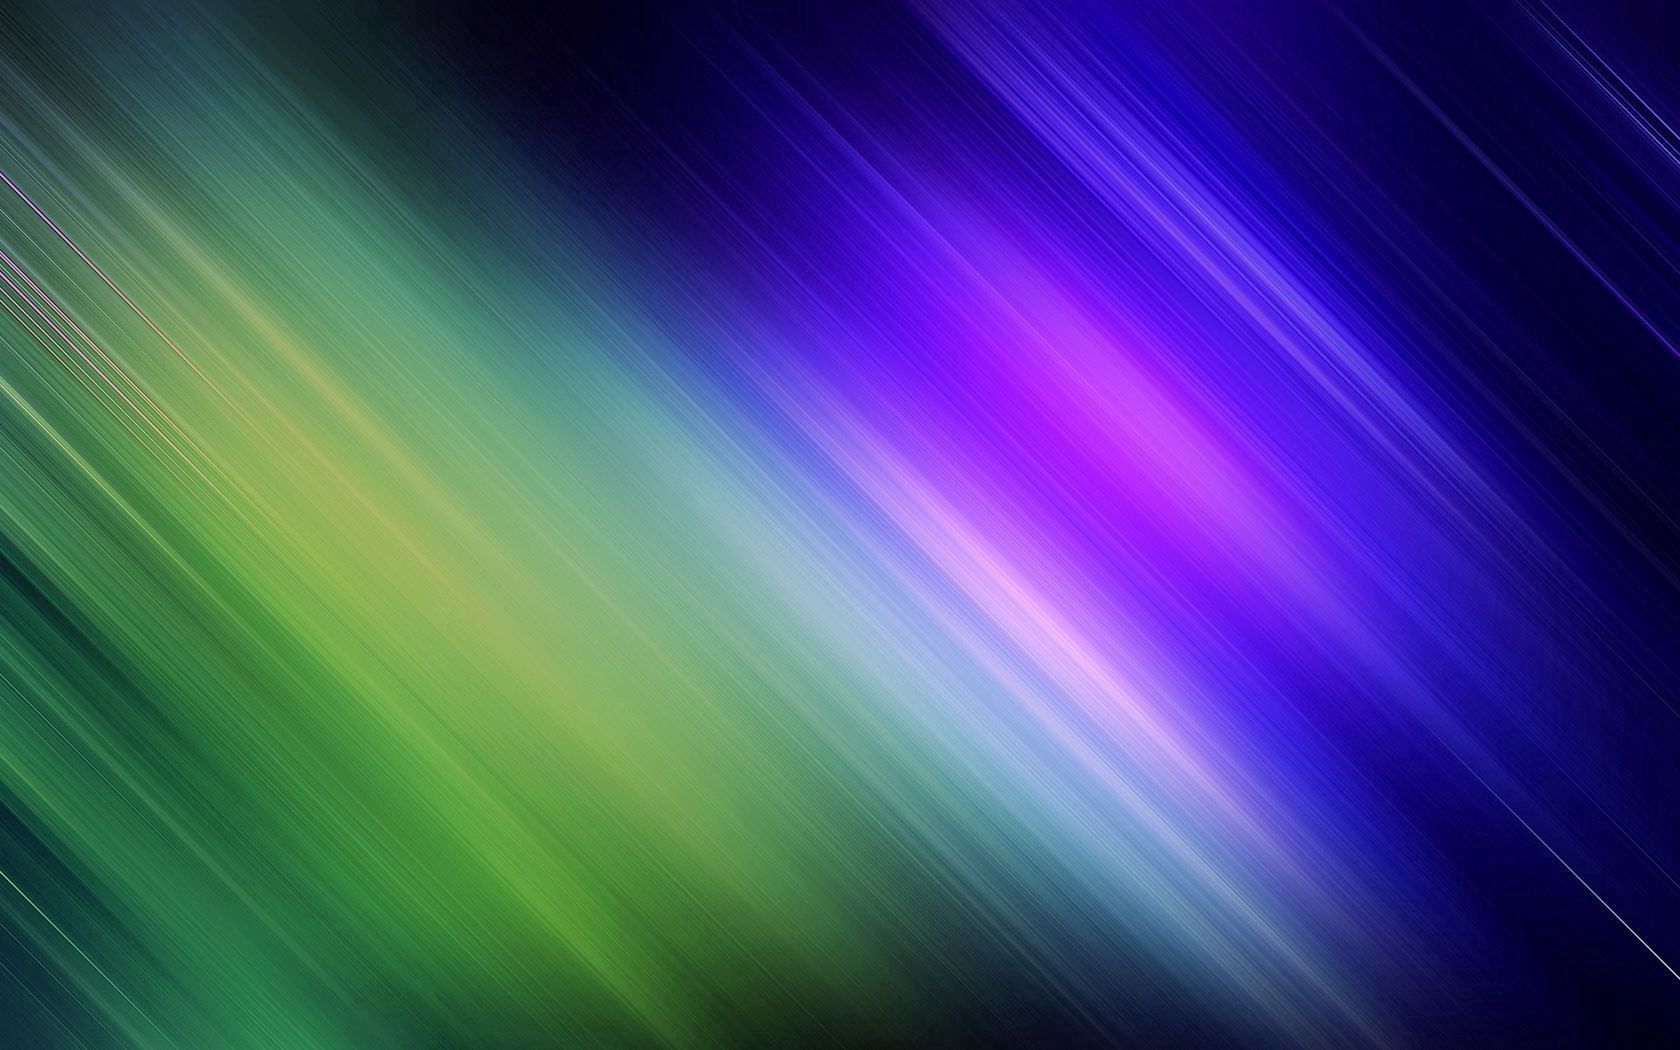 light, obliquely, abstract, shine, lines, light coloured cellphone